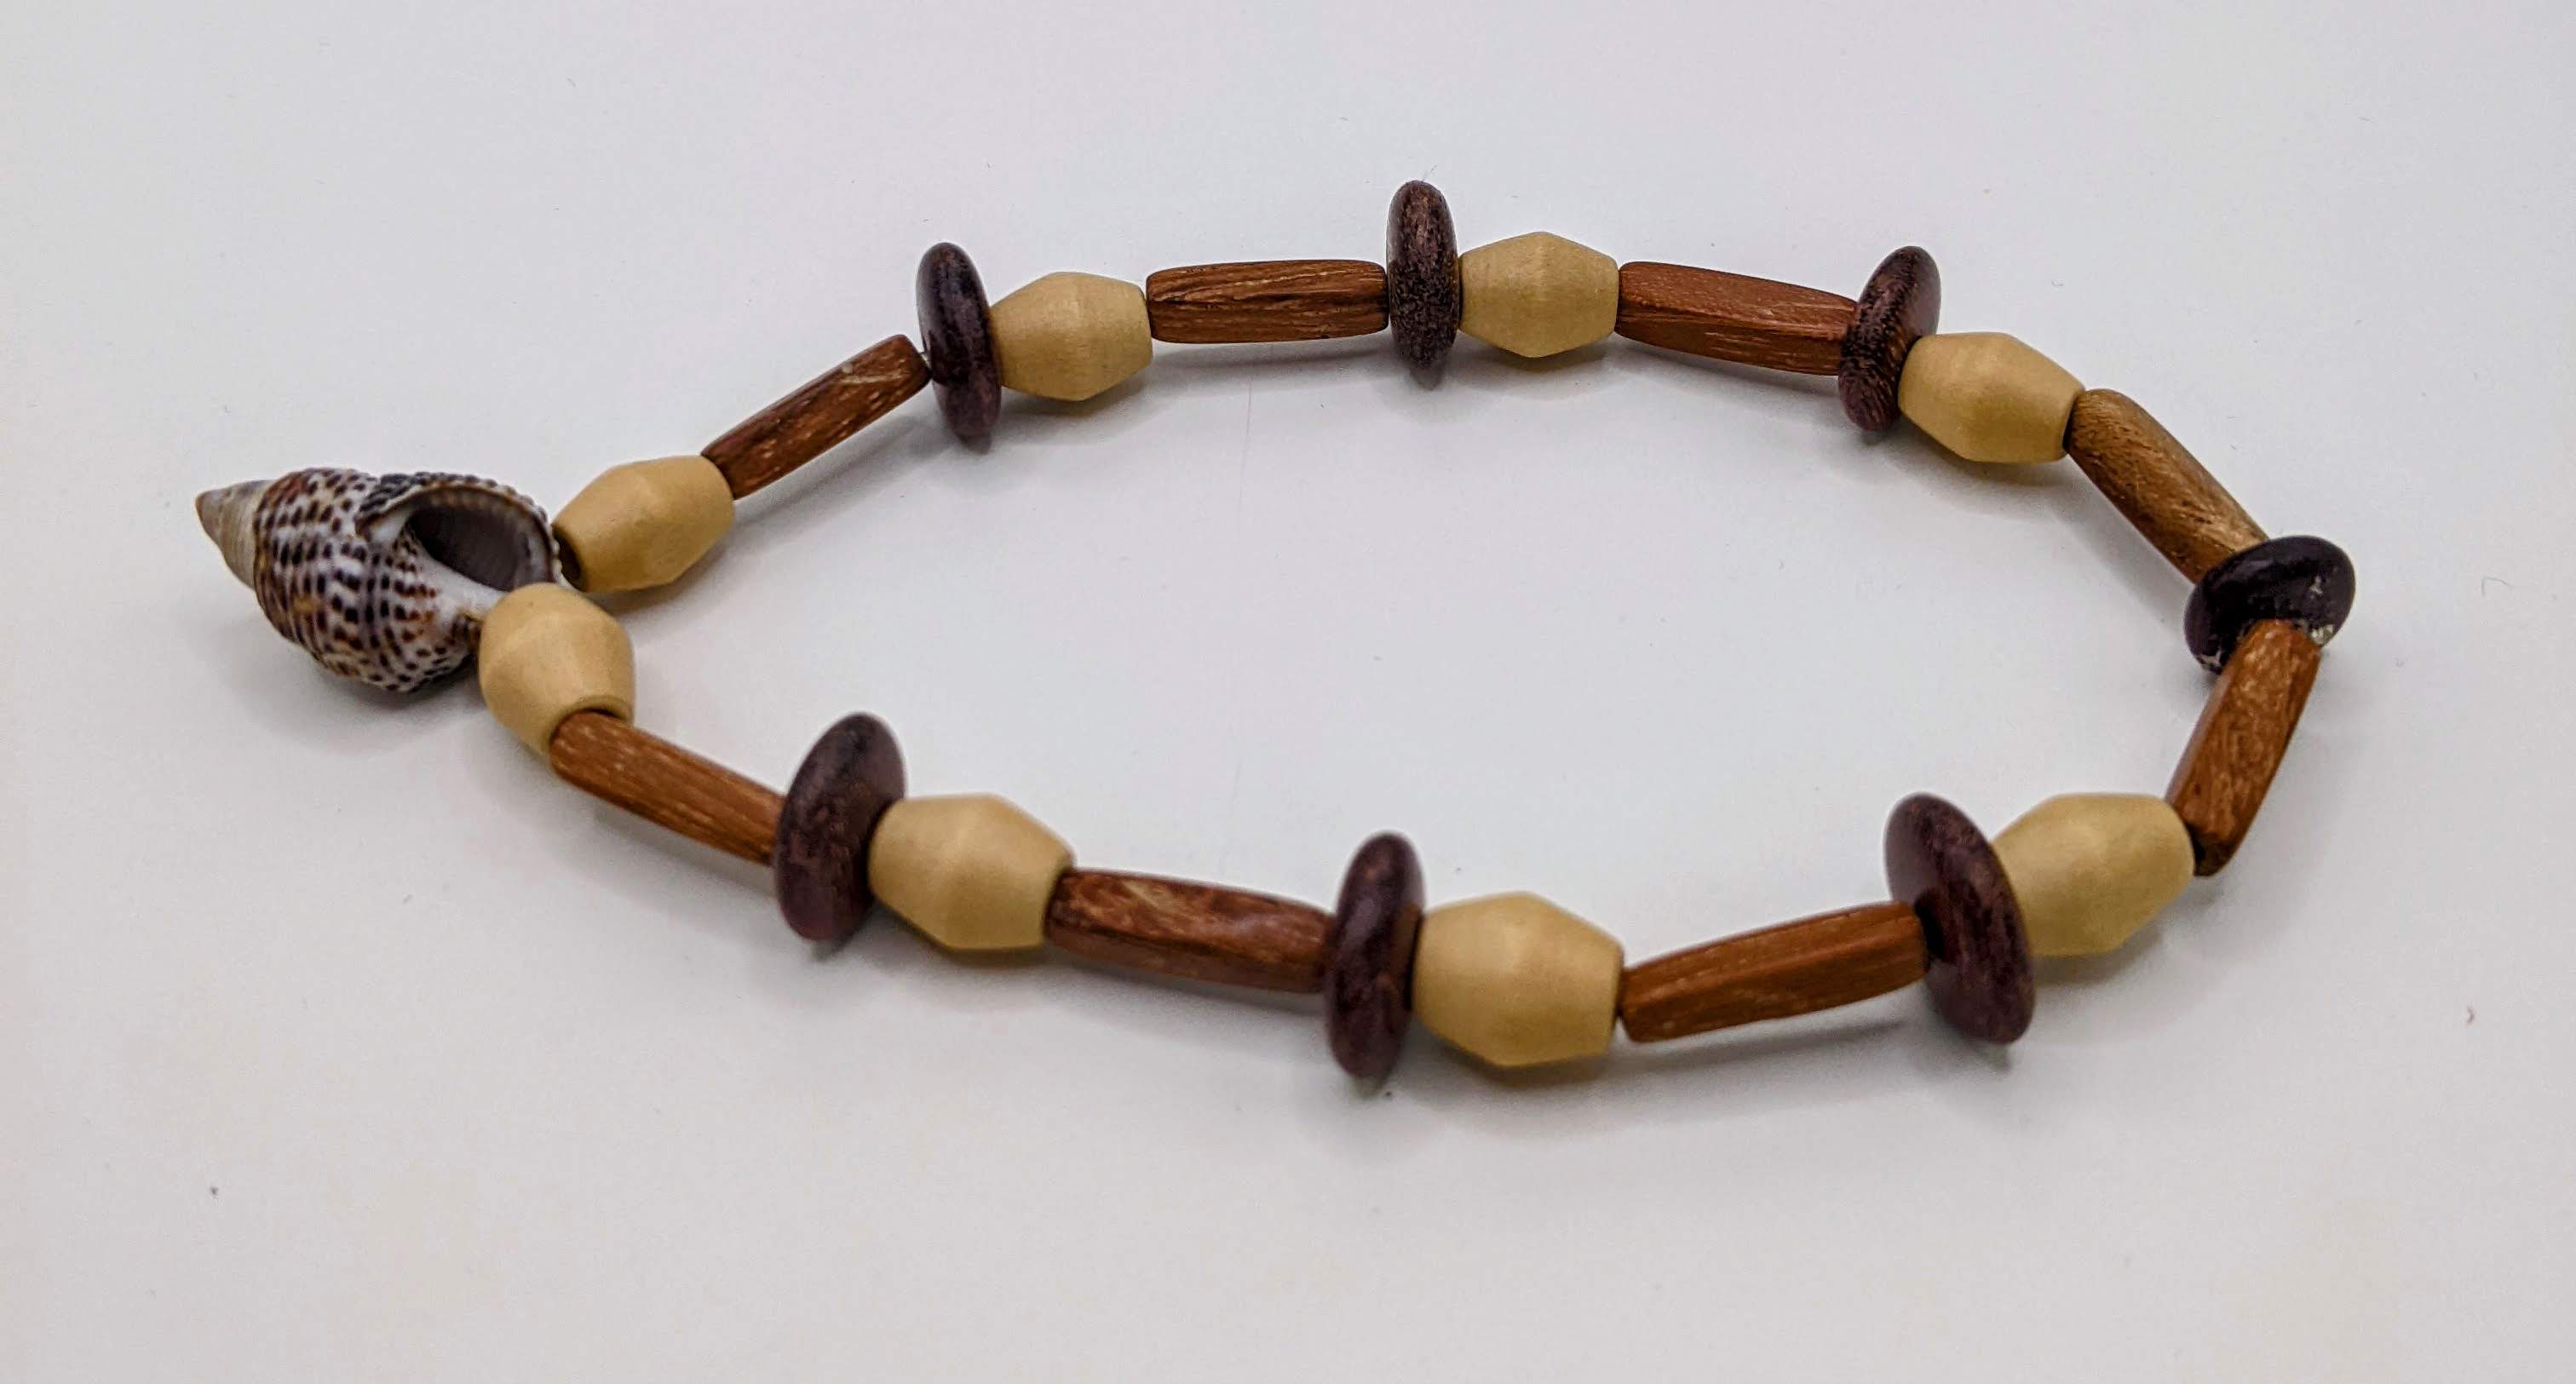 Periwinkle shell and wood beads bracelet